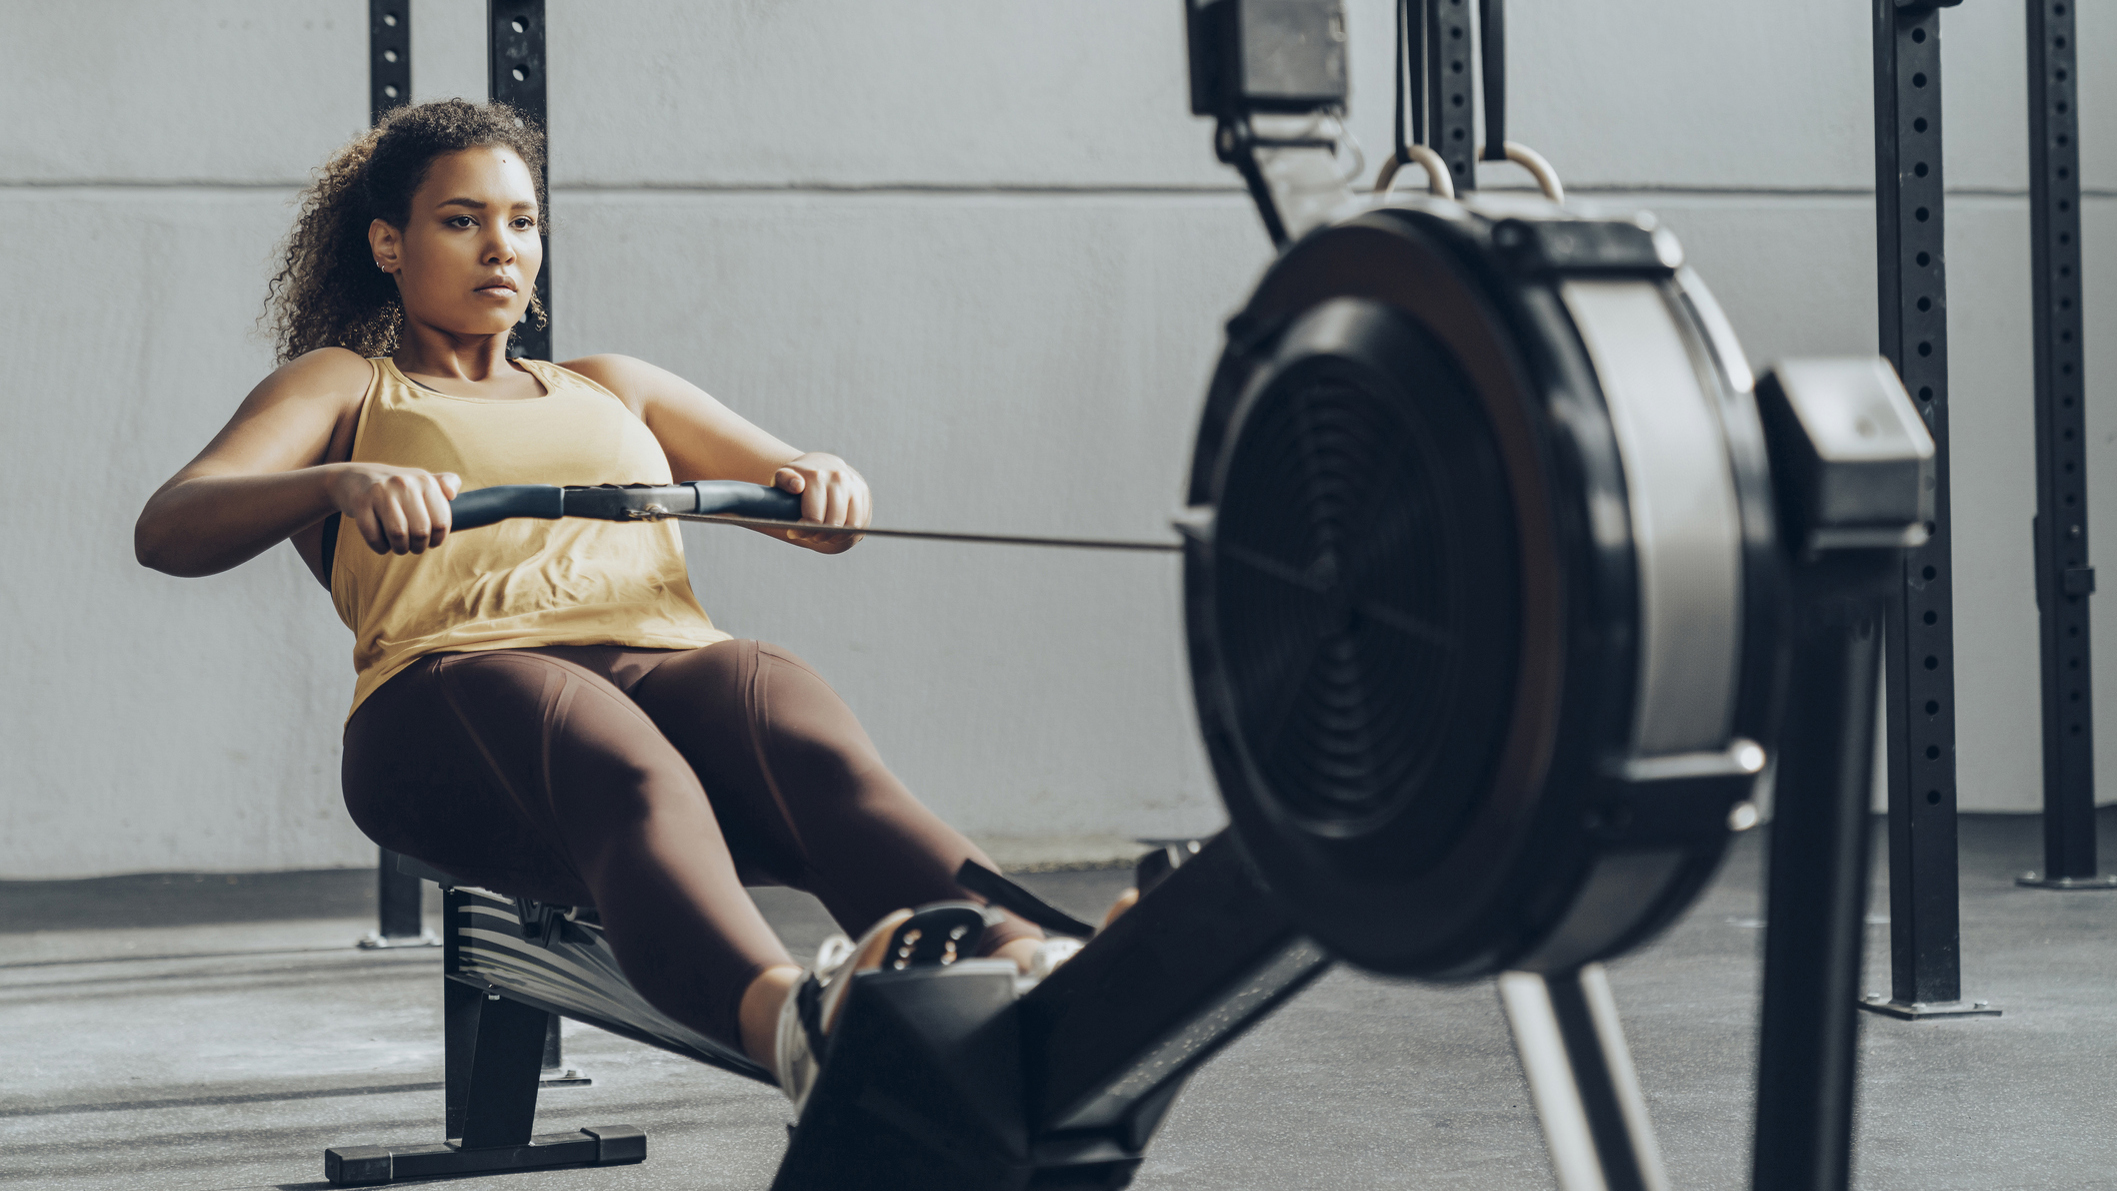 How to Use a Rowing Machine: Common Mistakes and Proper Form